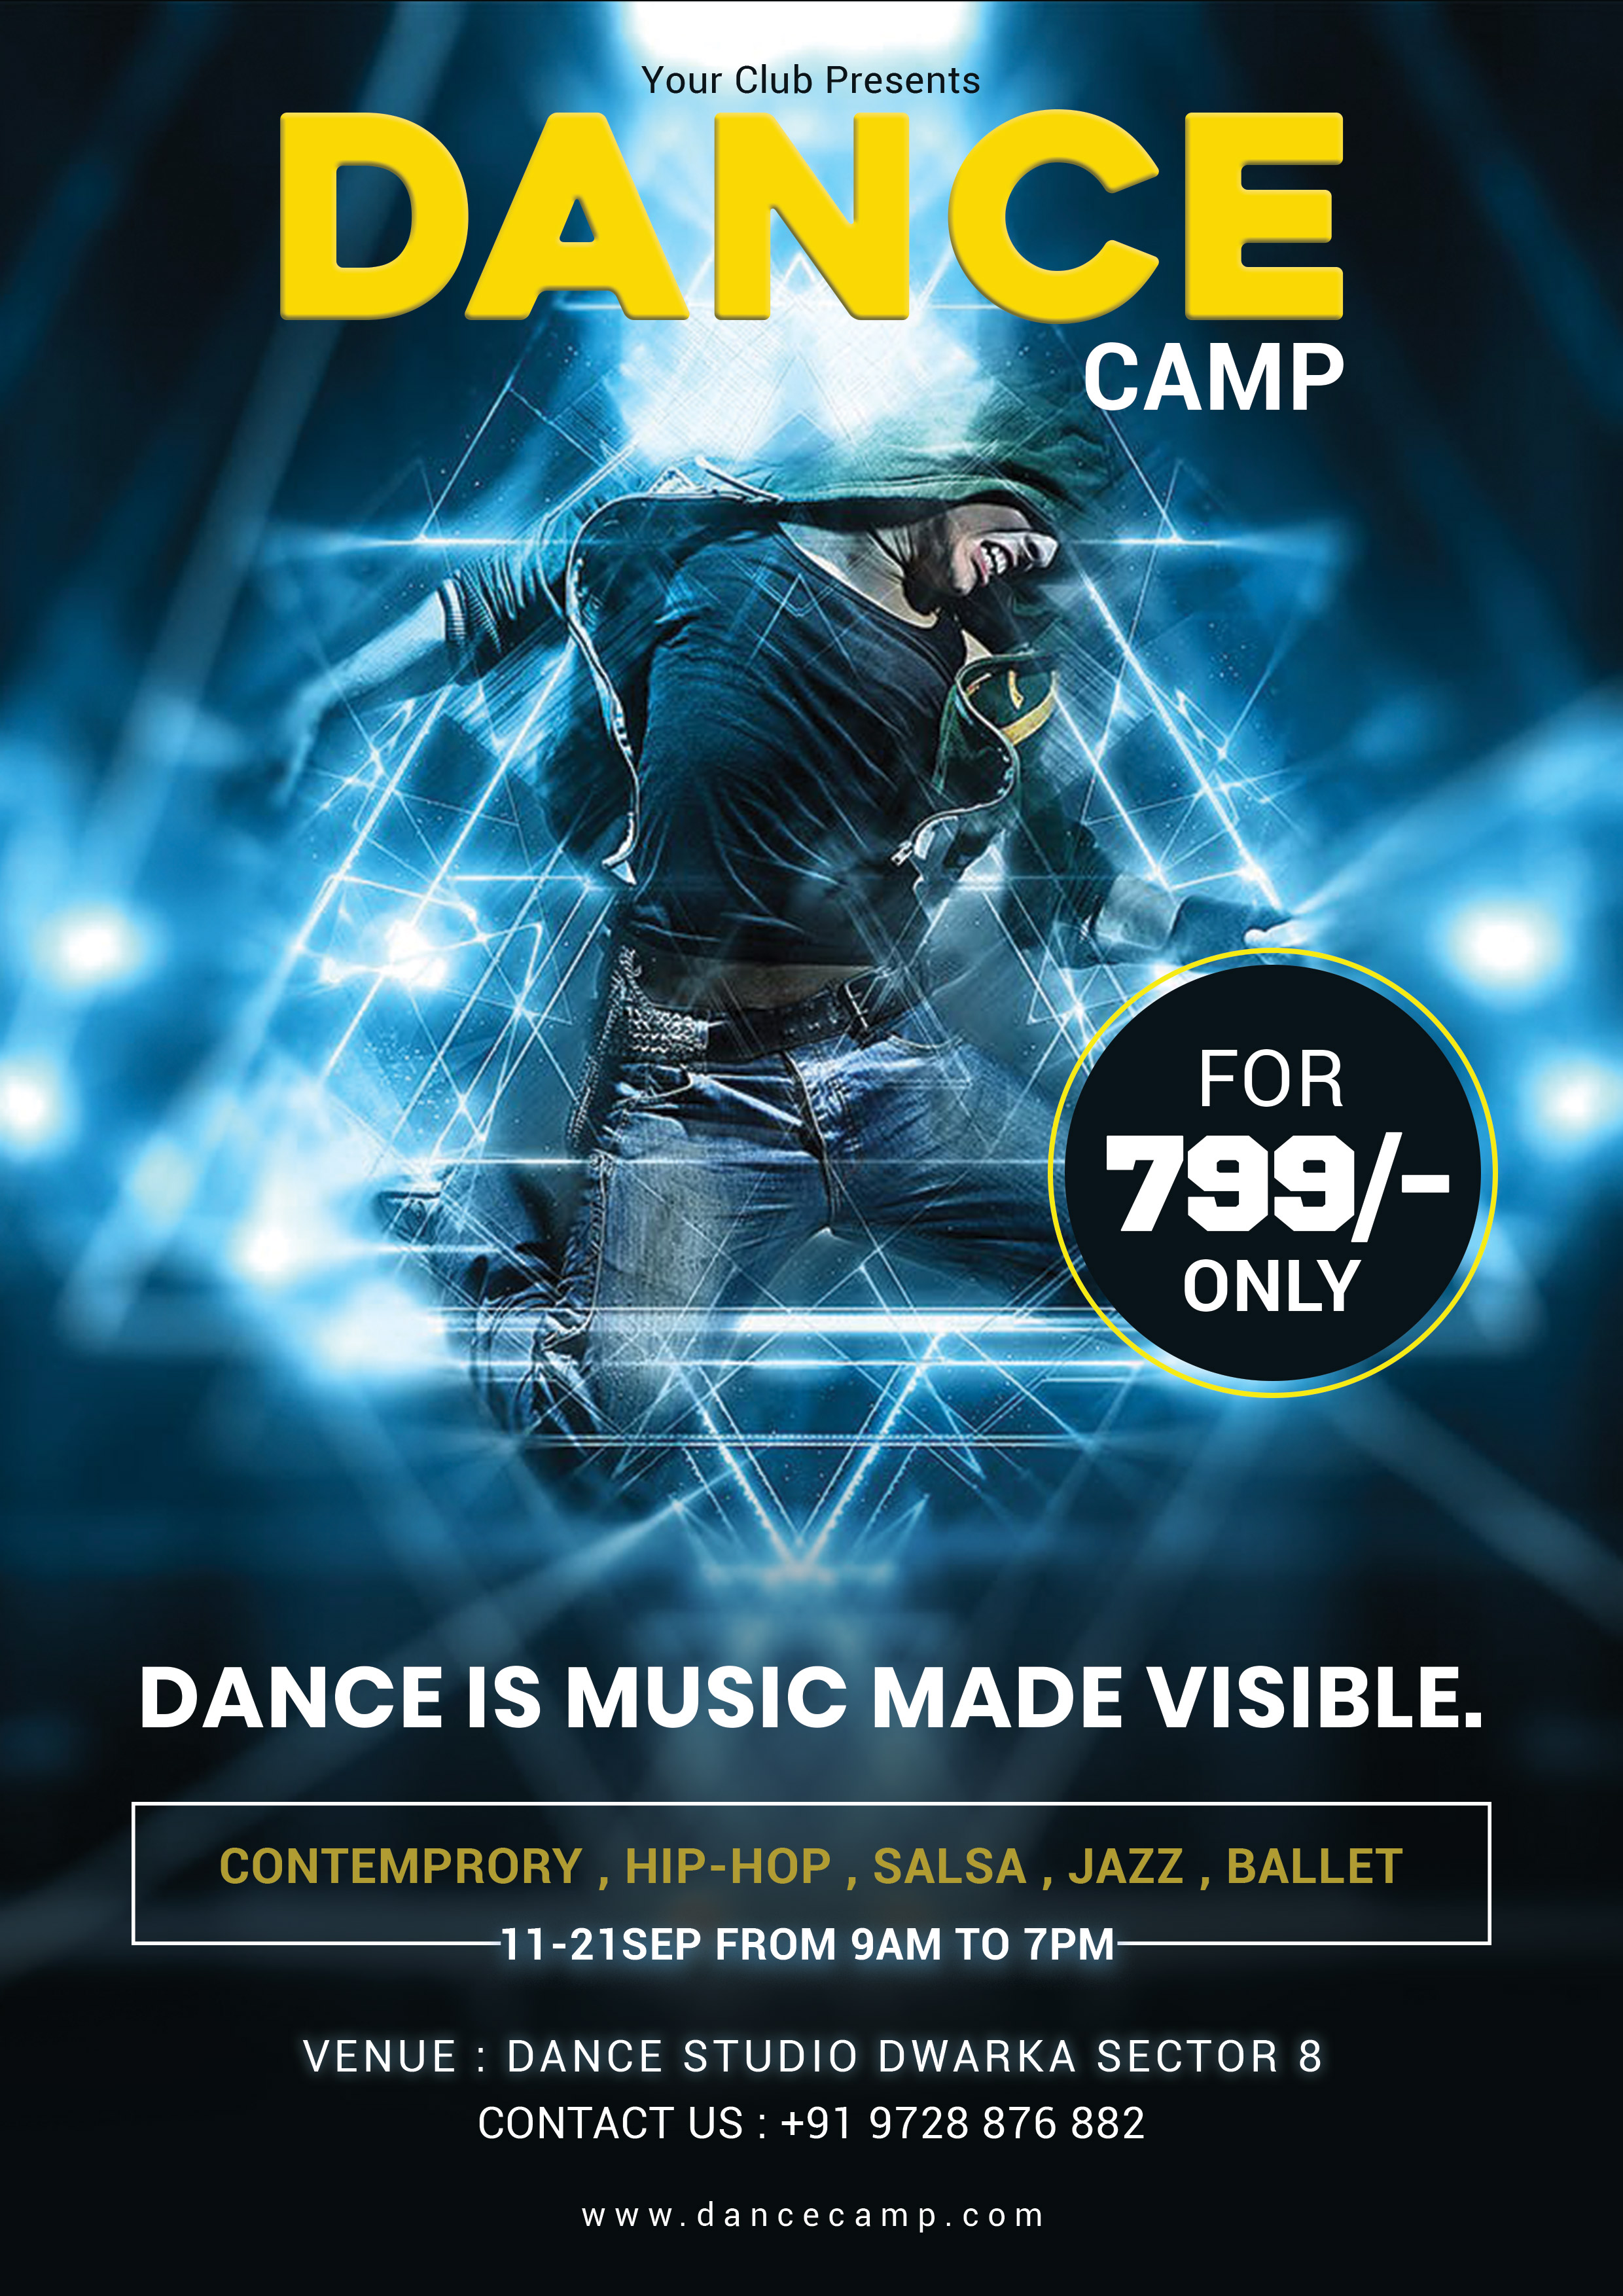 Dance Campaign Flyer Free PSD Template  FreedownloadPSD.com Intended For Benefit Dance Flyer Templates